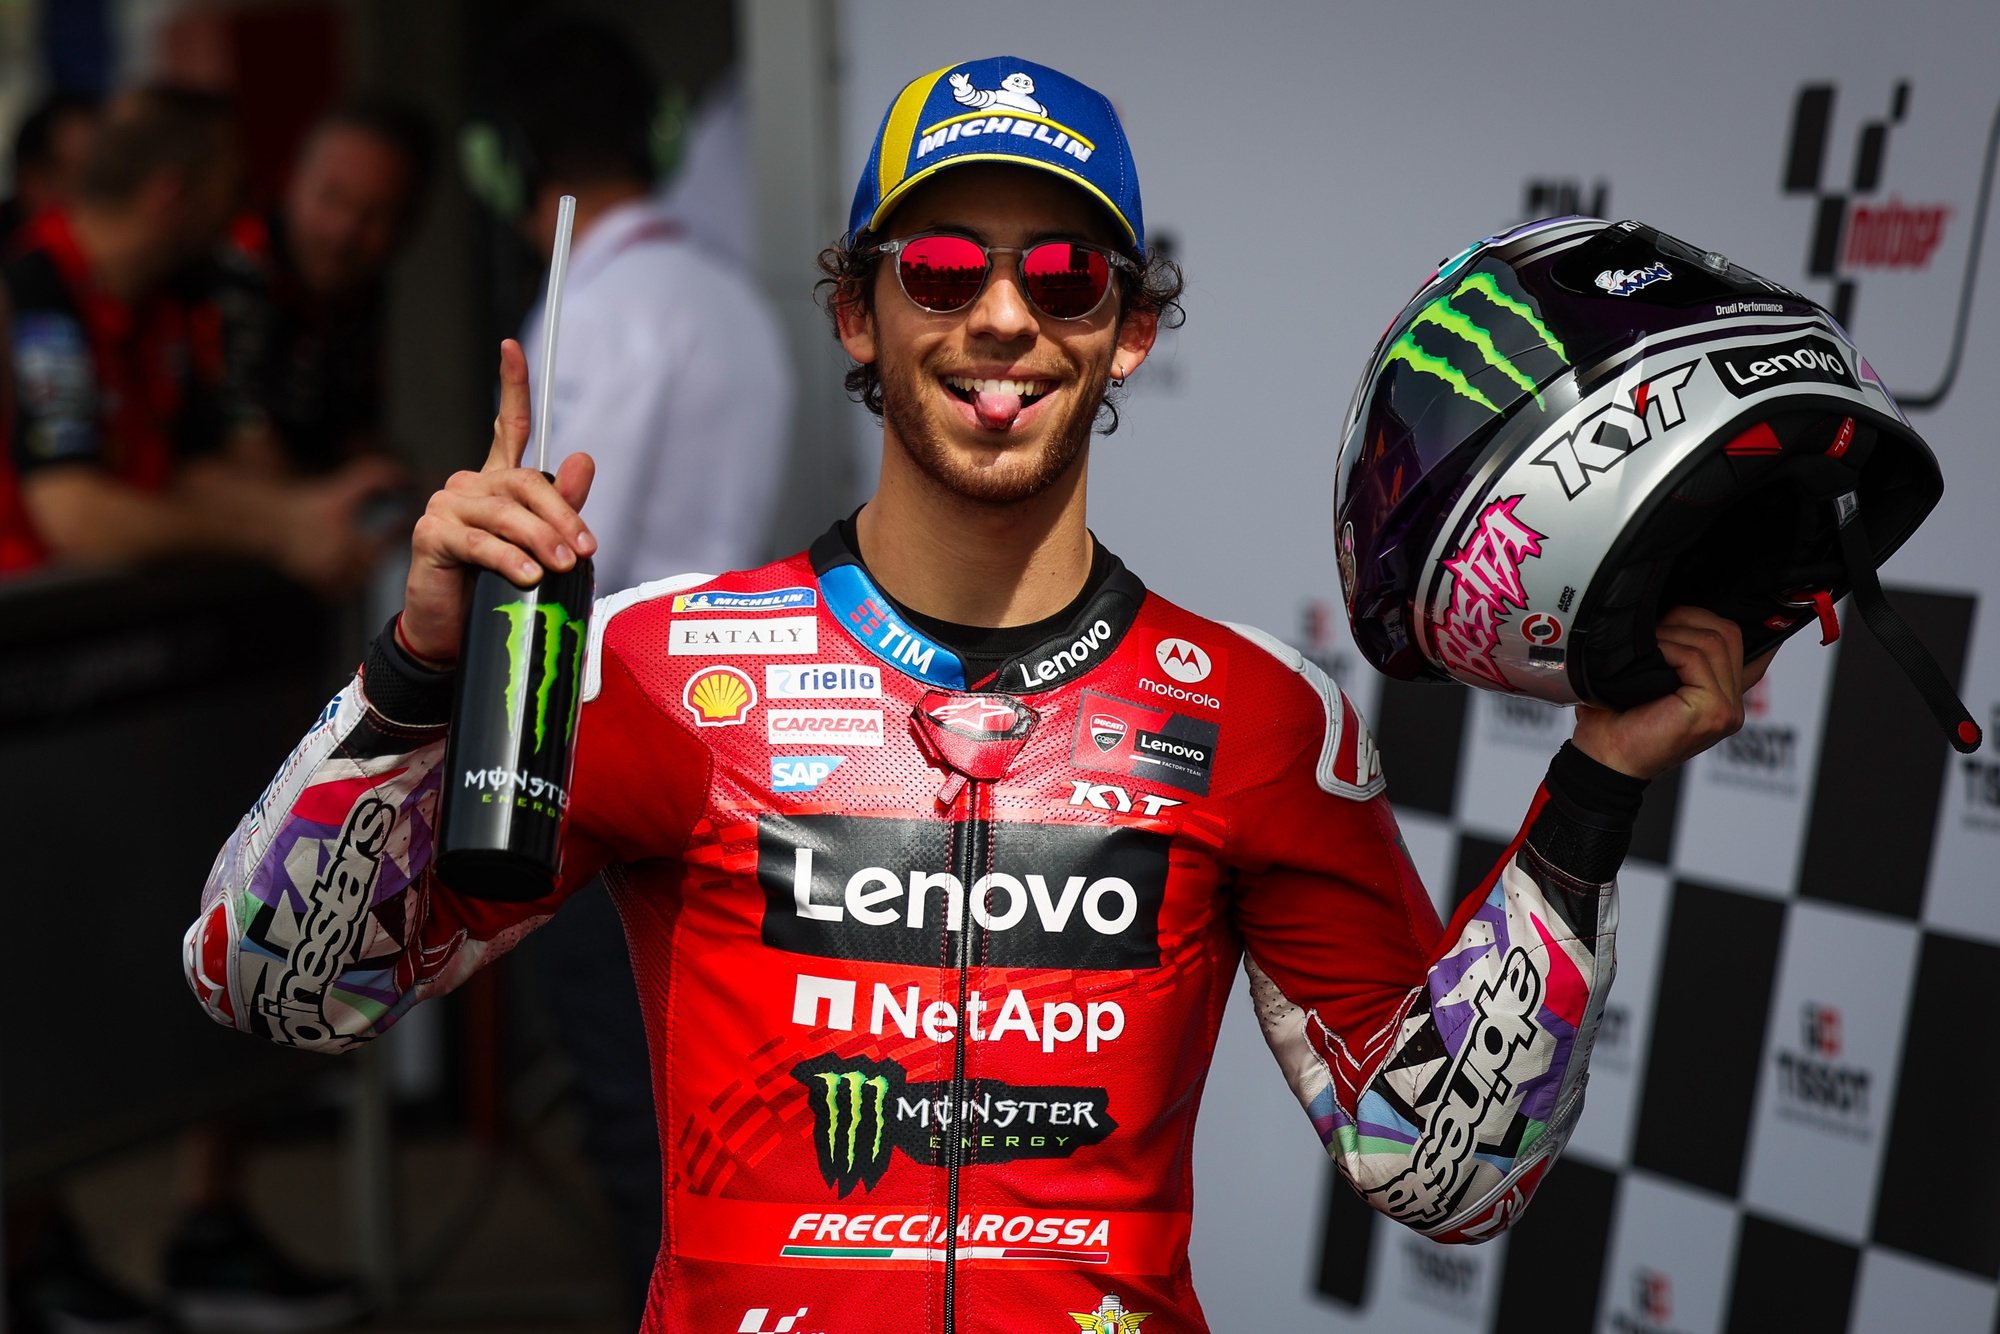 epa11238567 Enea Bastianini of Italy and Ducati Lenovo Team celebrates after getting pole position of the Motorcycling Grand Prix of Portugal, in Portimao, Portugal, 23 March 2024. The 2024 Motorcycling Grand Prix of Portugal is held on 24 March.  EPA/JOSE SENA GOULAO